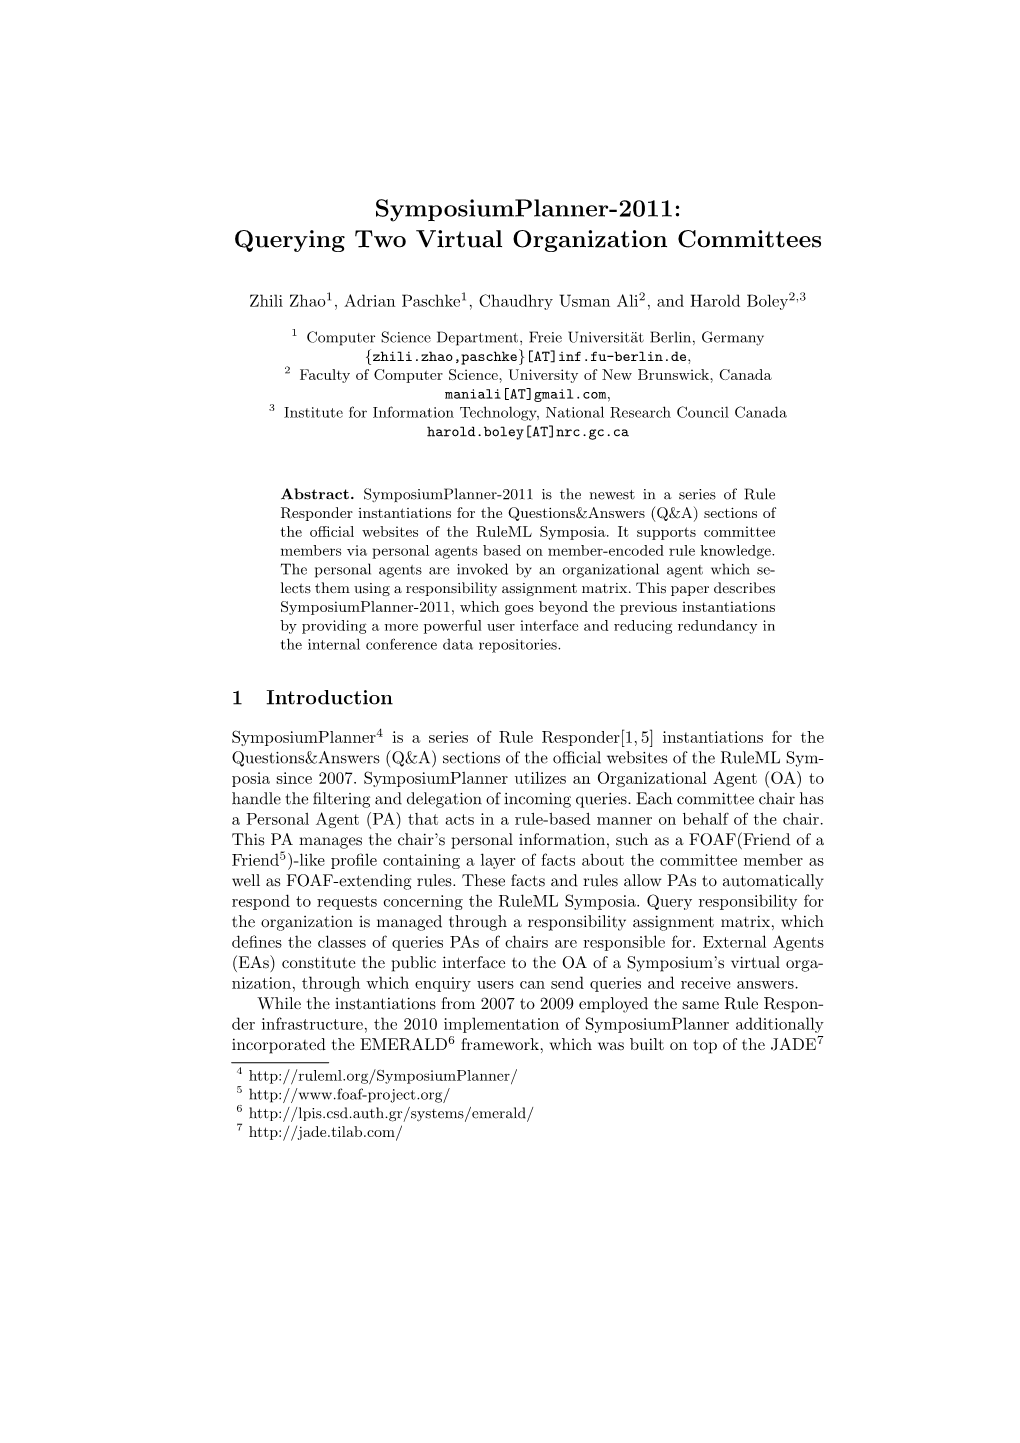 Symposiumplanner-2011: Querying Two Virtual Organization Committees